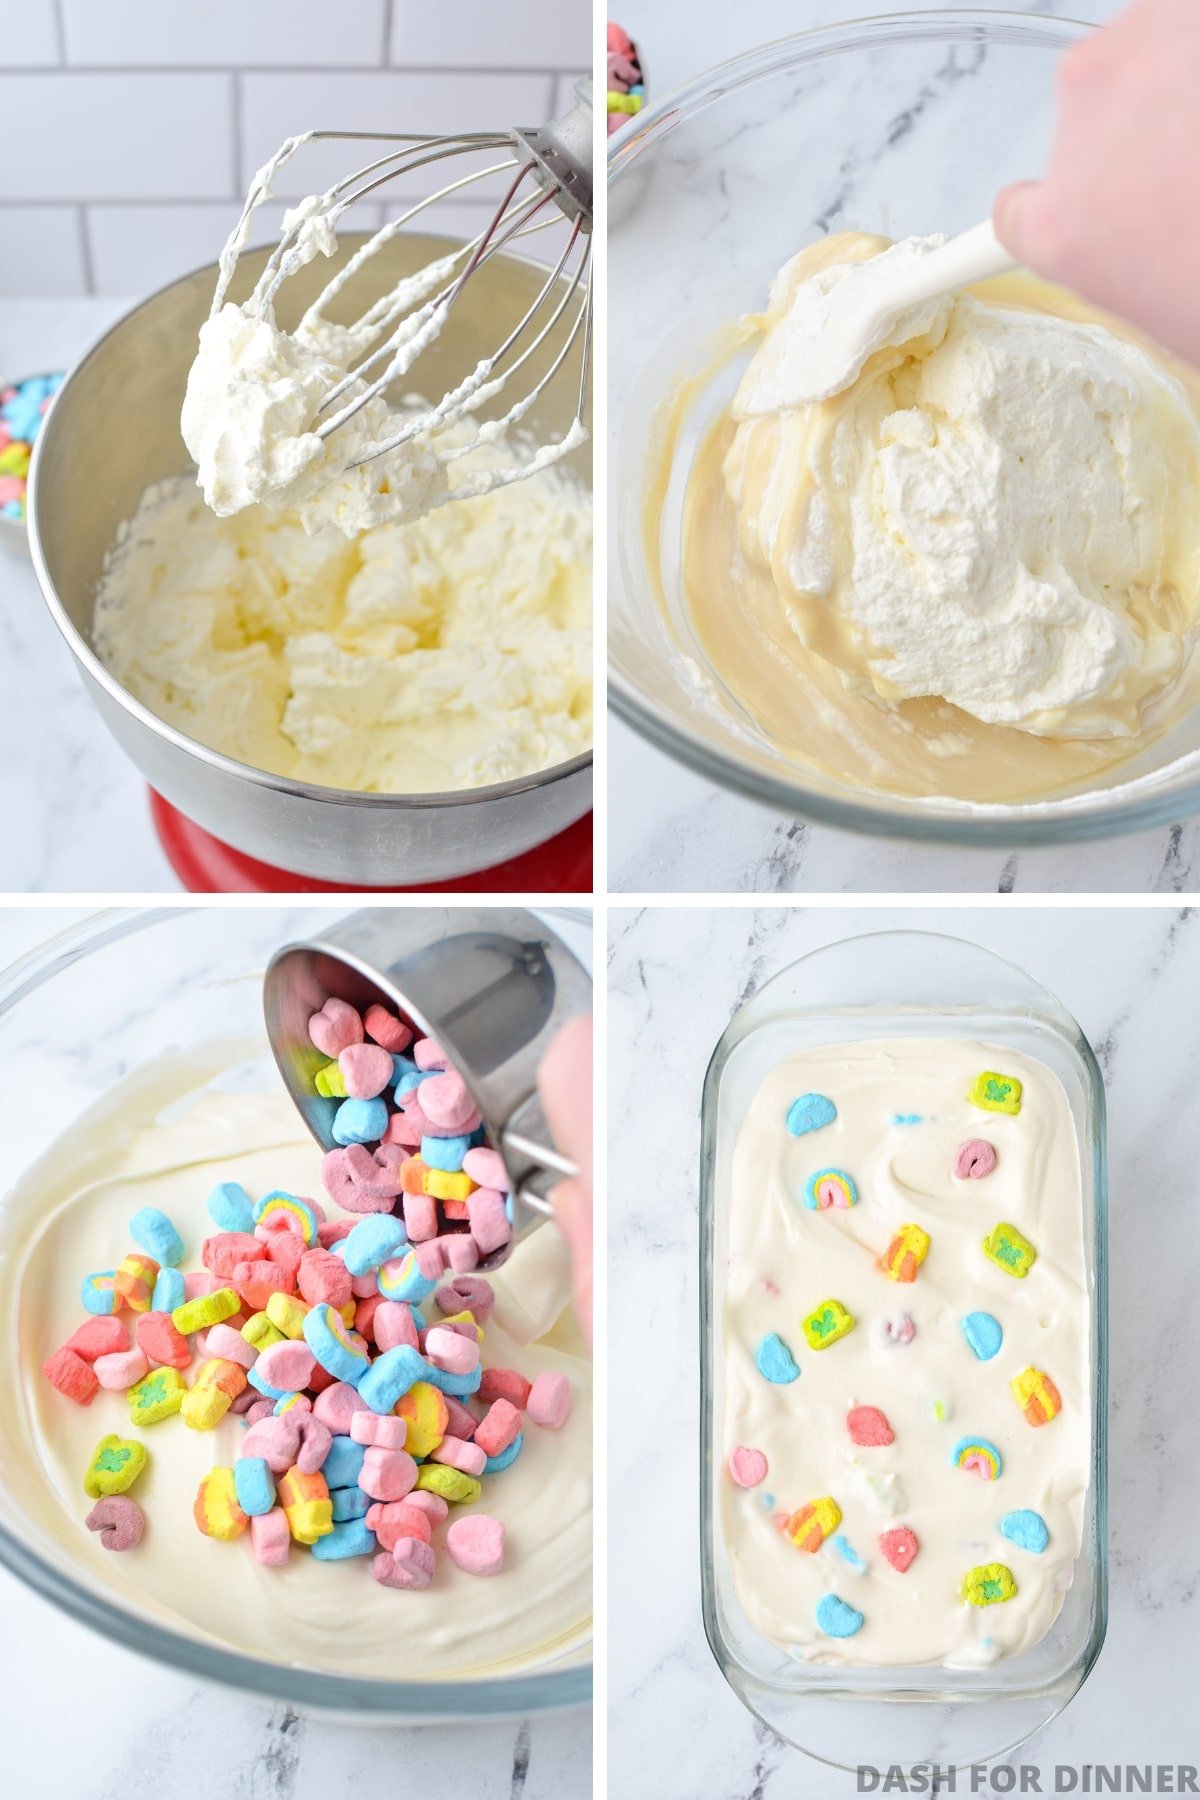 Whipping cream and folding it into an ice cream base with lucky charms marshmallows.